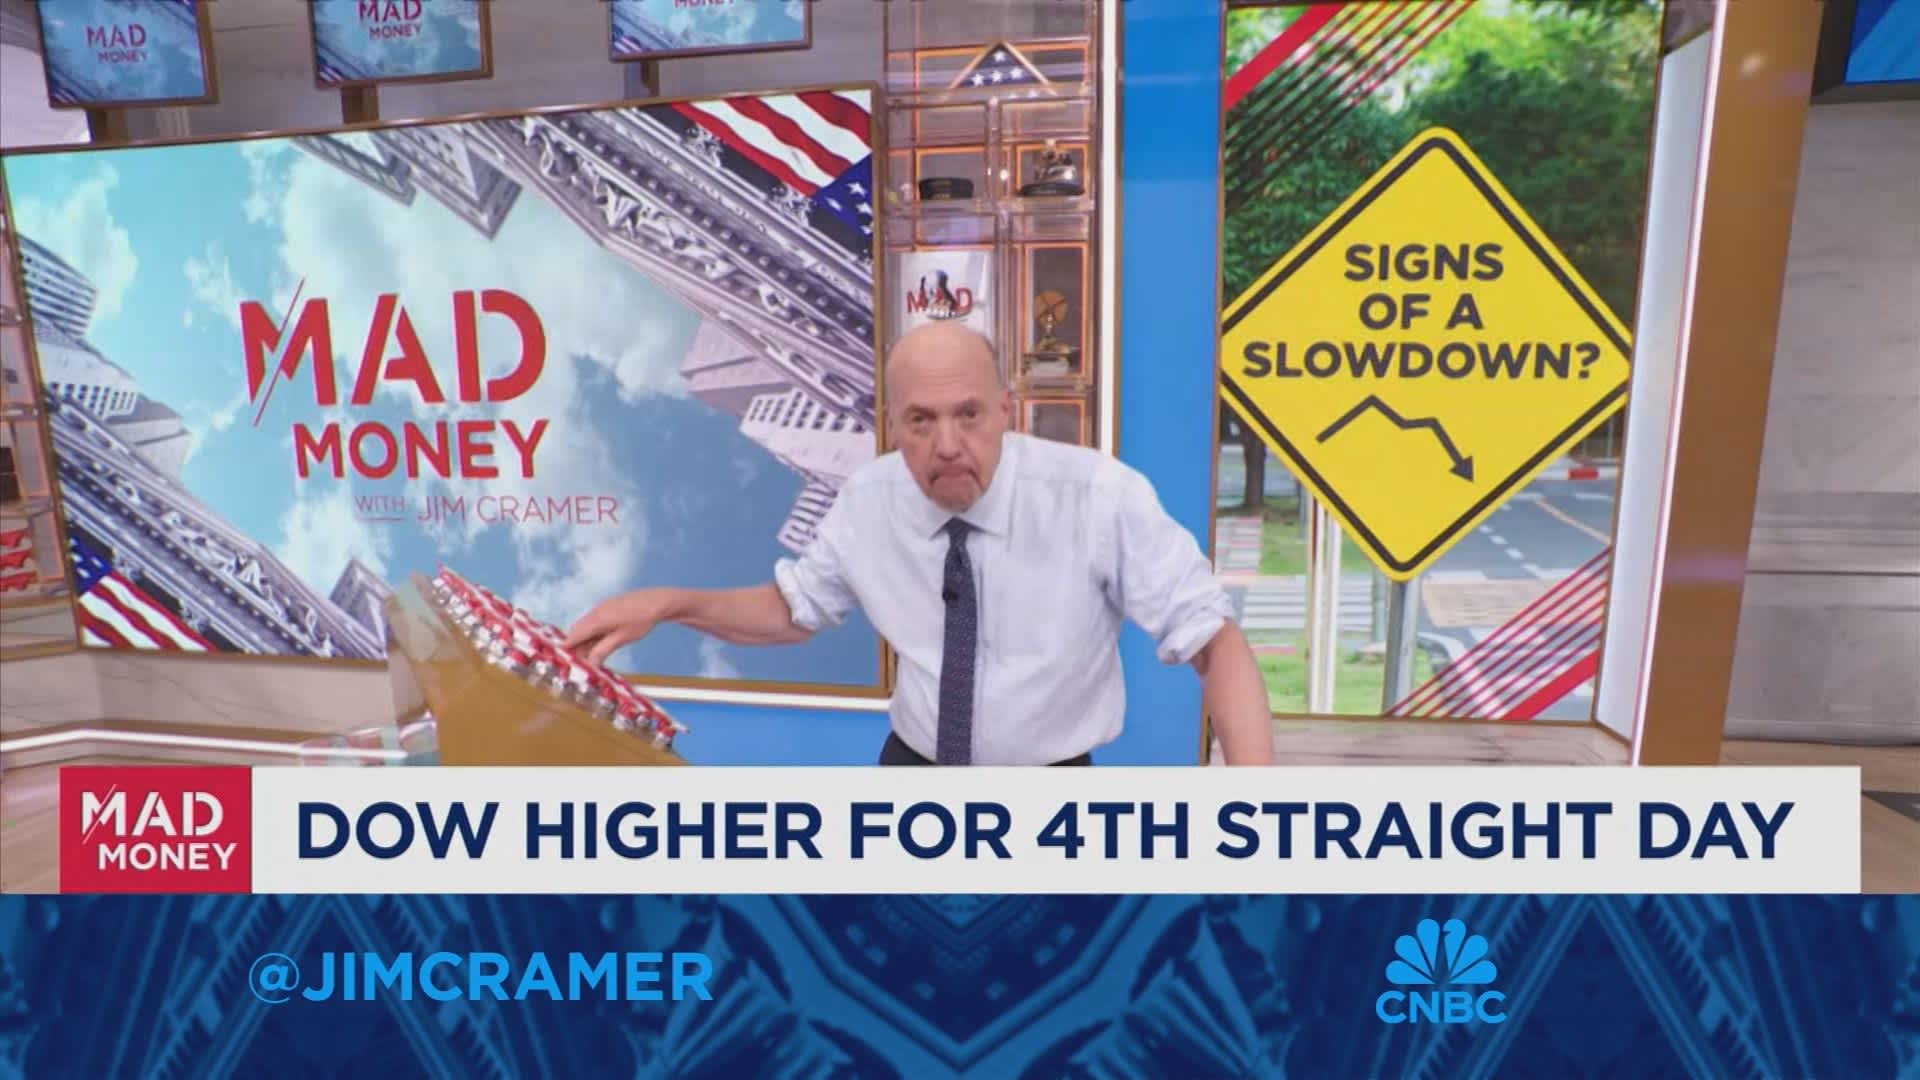 Anything that makes the Fed look stupid hurts its ability to maintain price stability: Jim Cramer [Video]